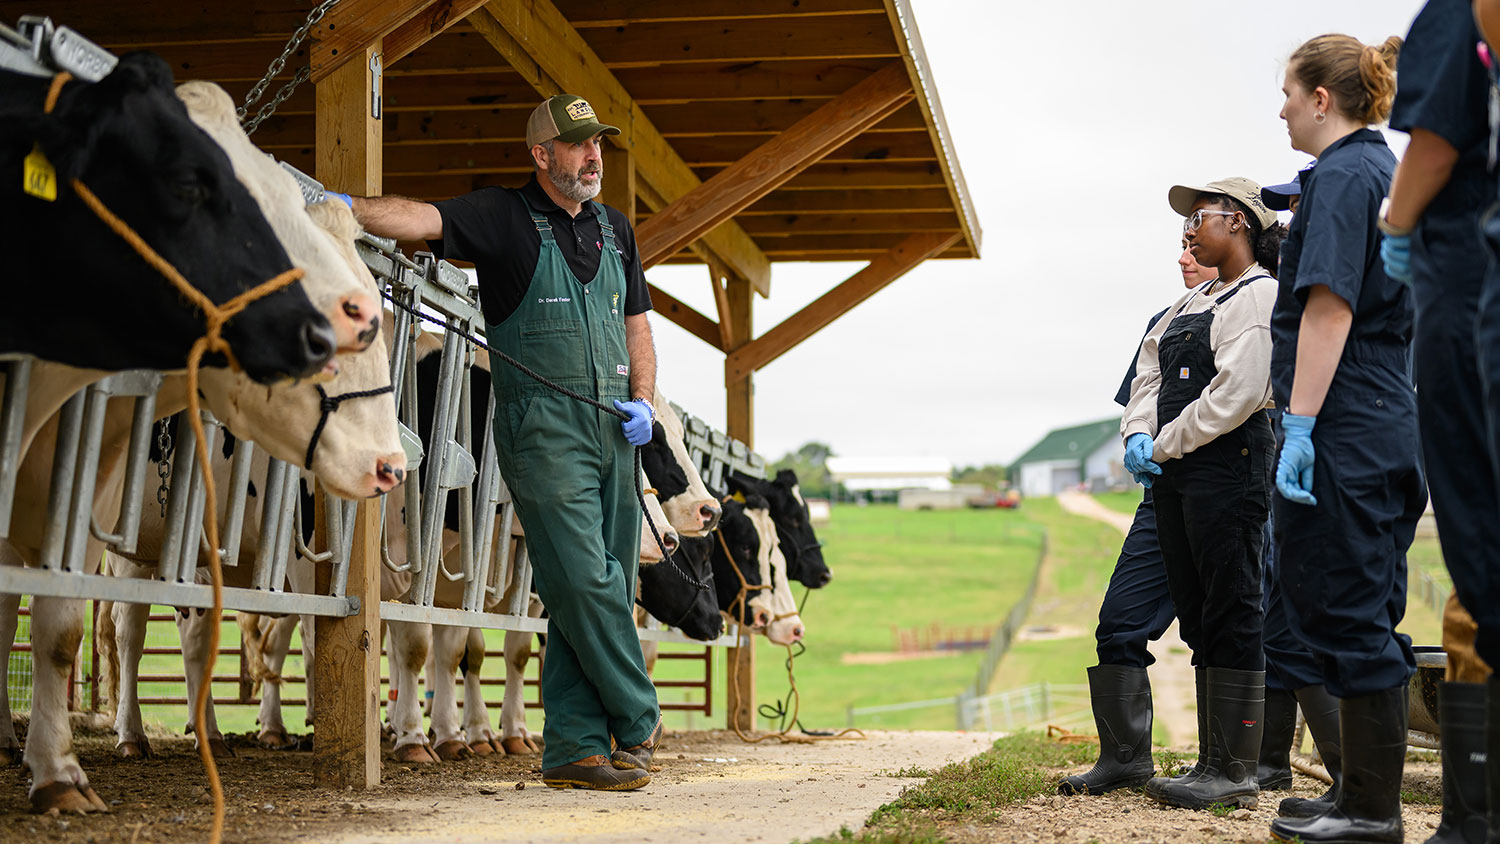 Students and staff work with cattle on the College of Veterinary Medicine's teaching farm.